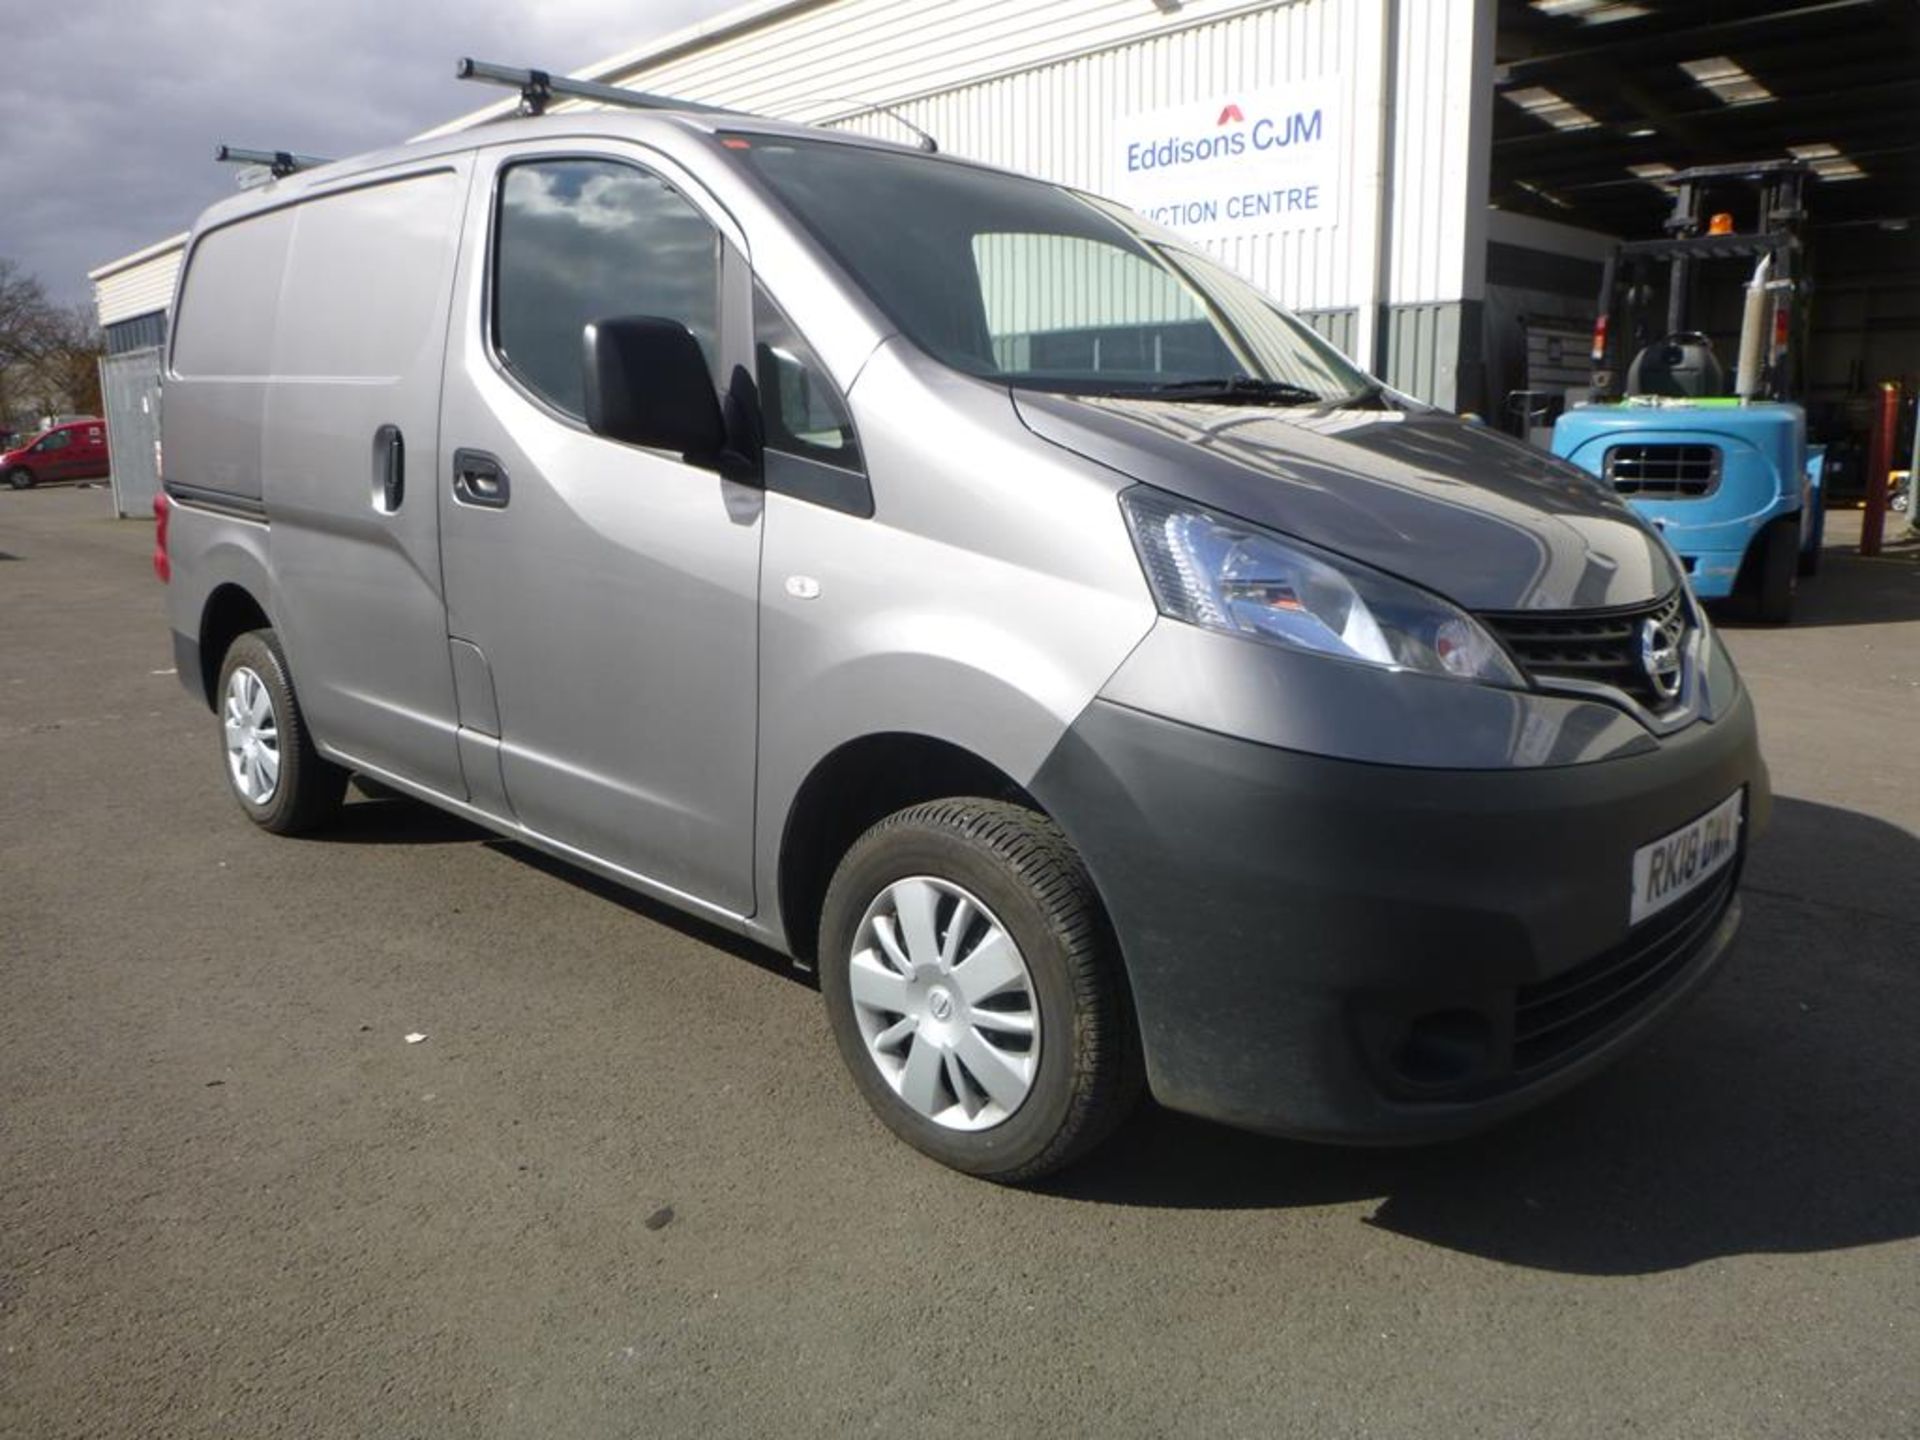 * 2018 Nissan NV200 Diesel Panel Van comes fitted with Rhino Roof Bars, First MOT due 19th March